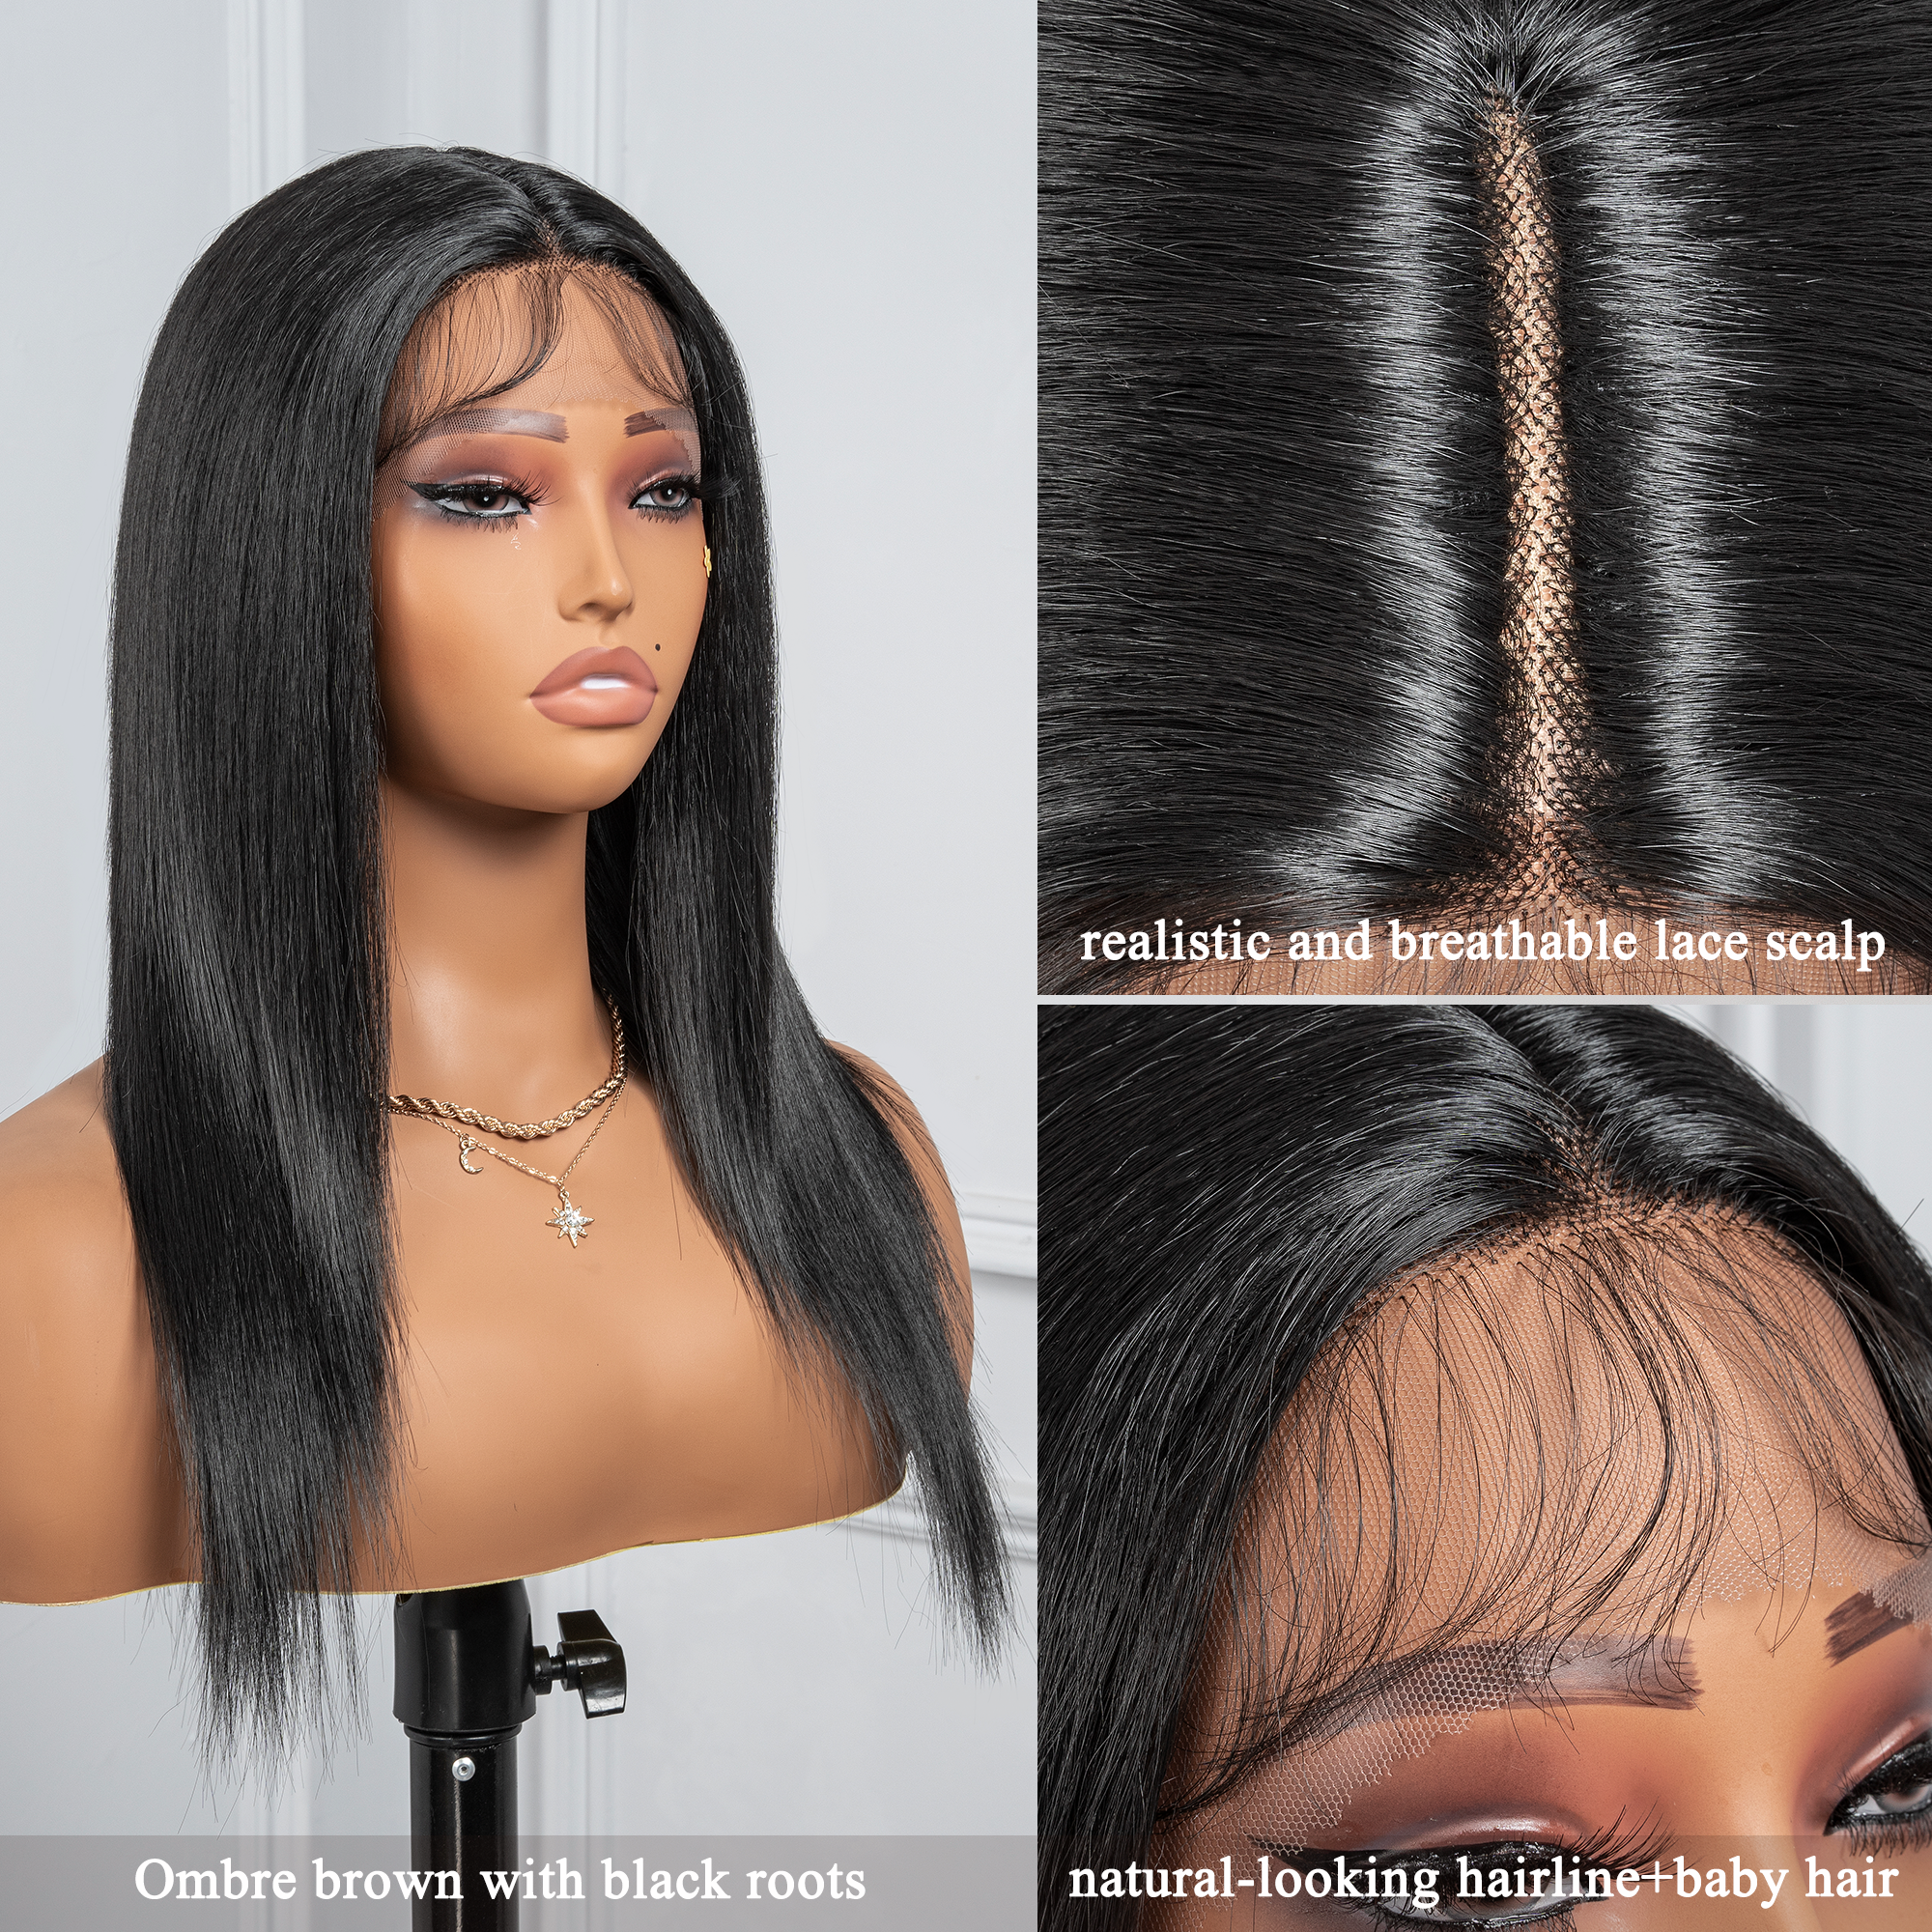 Toyotress Airy Yaki Straight T-middle Part Lace Front Wigs with Baby Hair | 20-32 Inch Long Soft Human Hair Rival Brown With Piano Highlights Wig(1472)